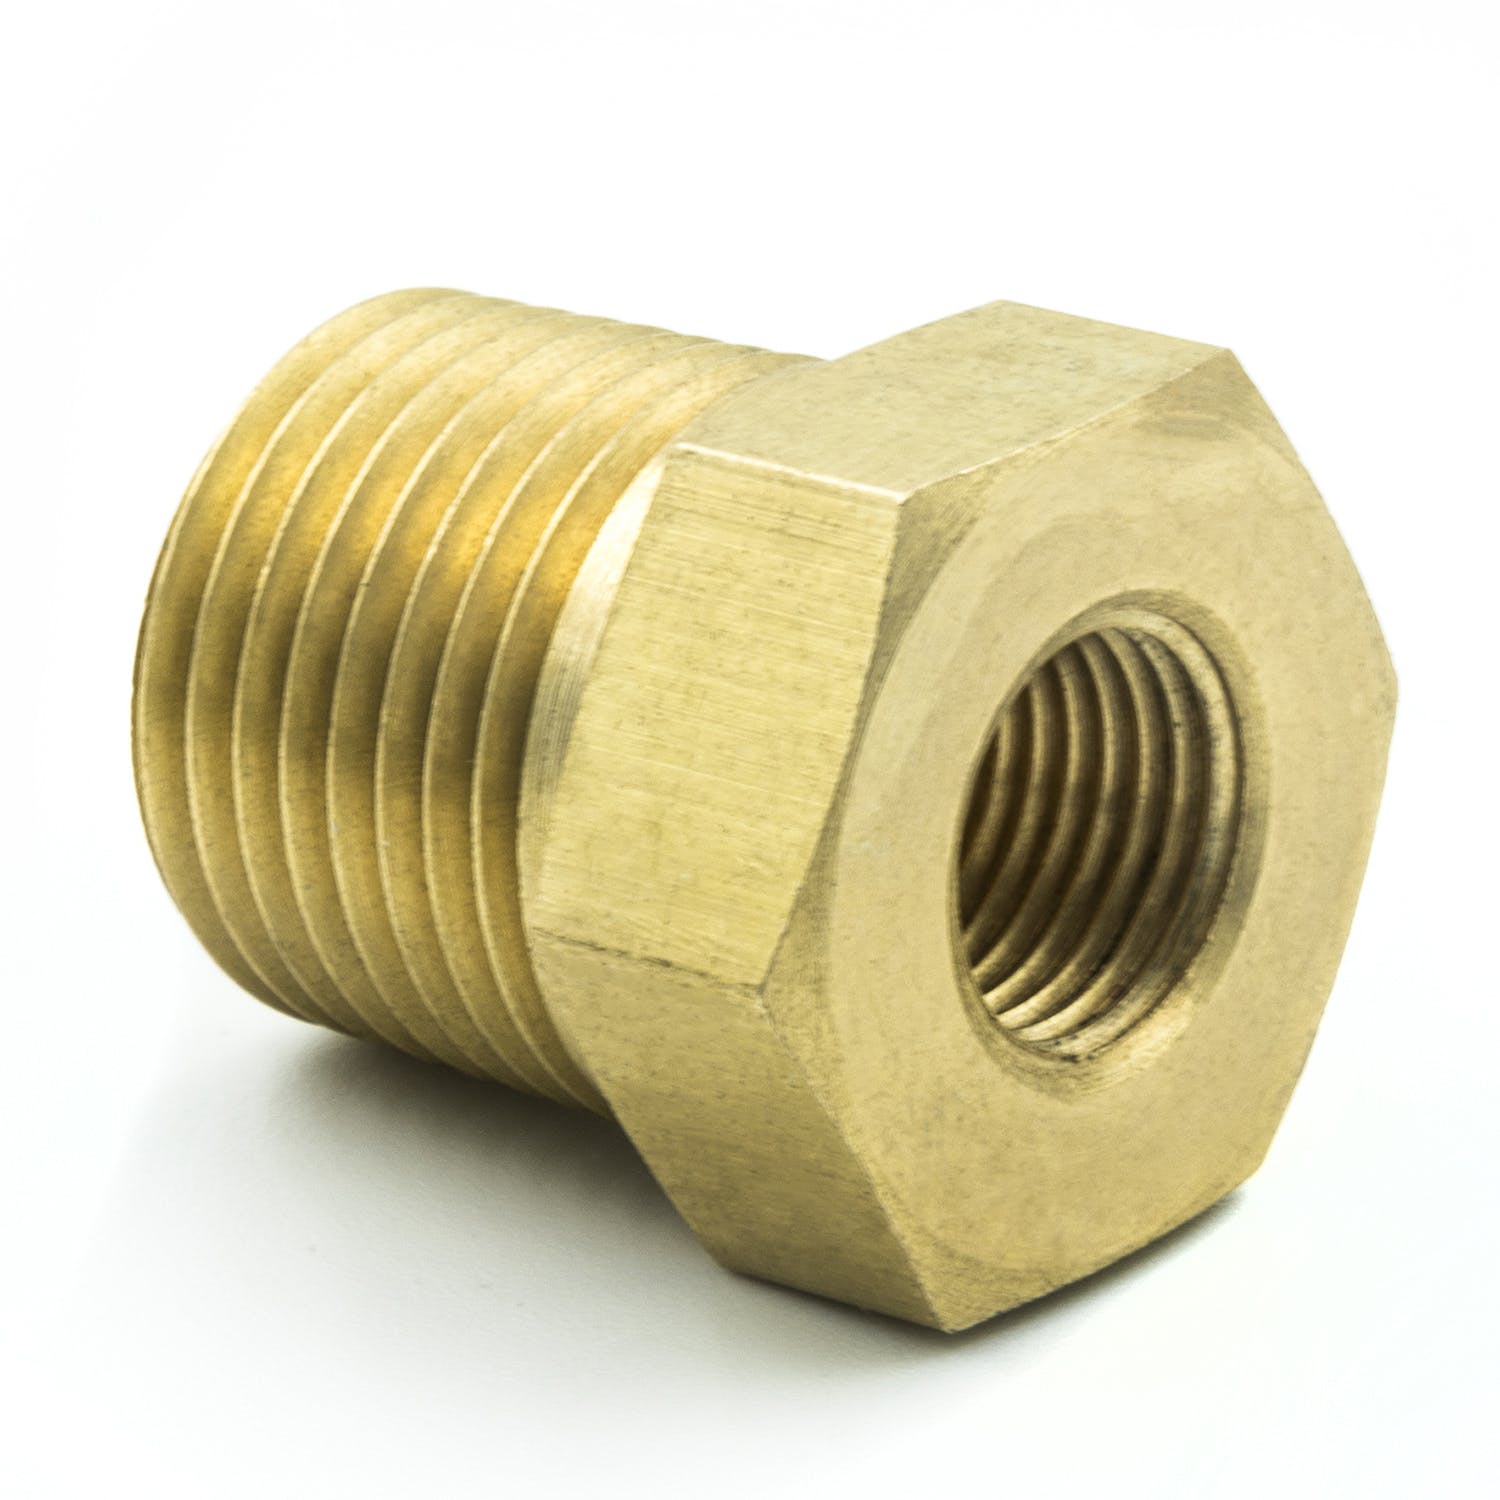 AutoMeter Products 2284 Adapter Fitting, 3/8 NPT Male, 1/8 NPT Female, Brass